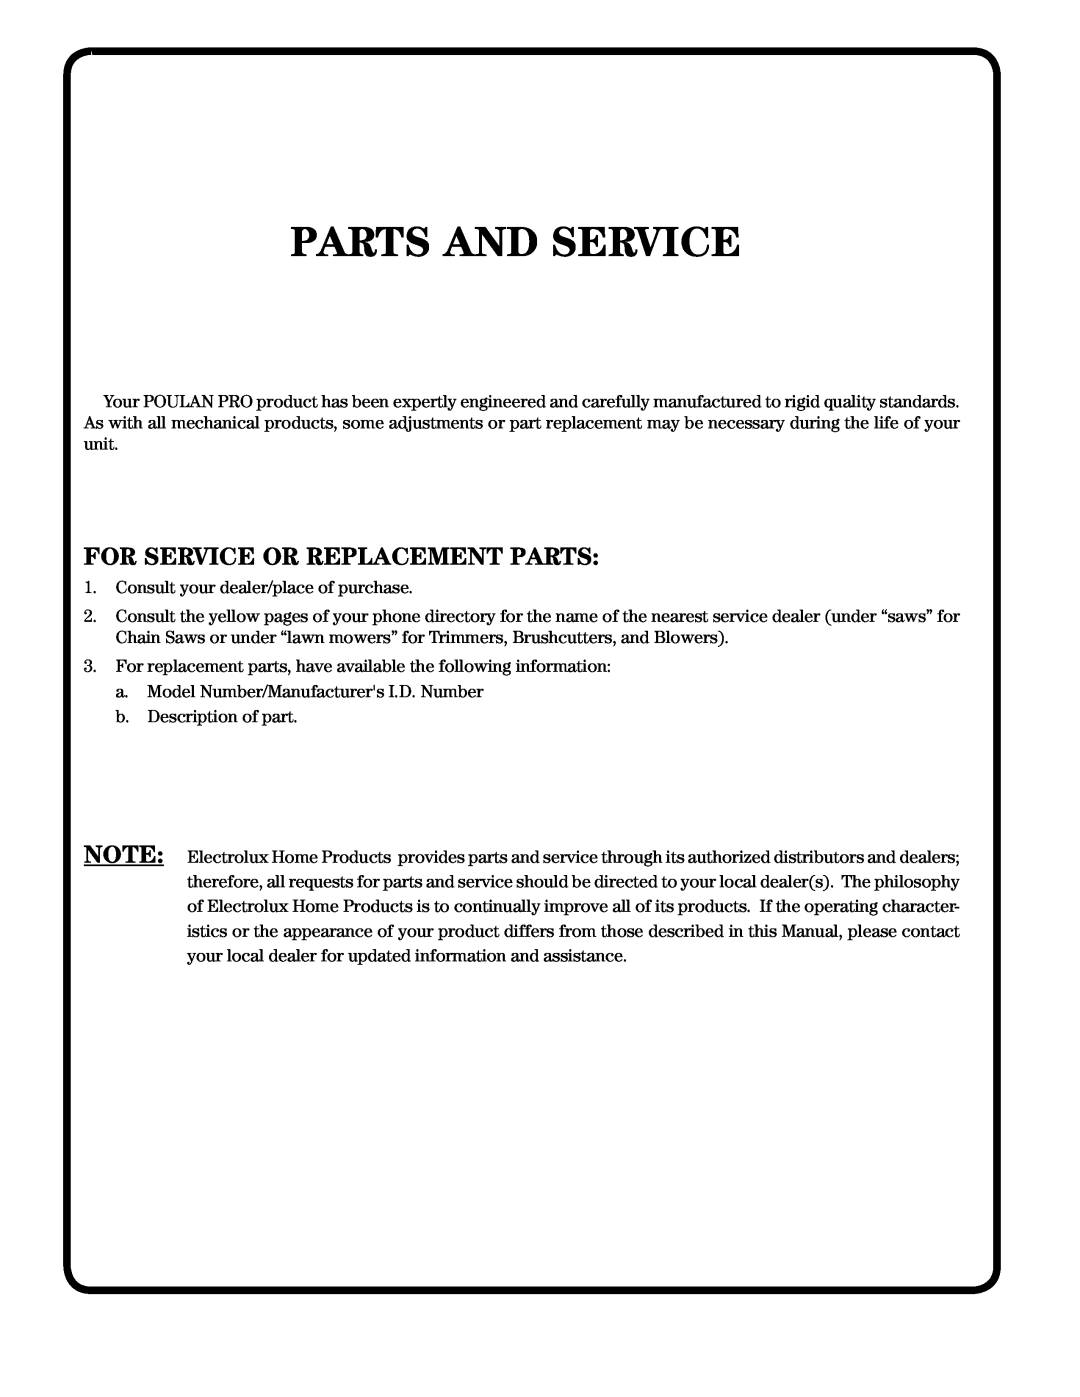 Poulan 188904 owner manual Parts And Service, For Service Or Replacement Parts 